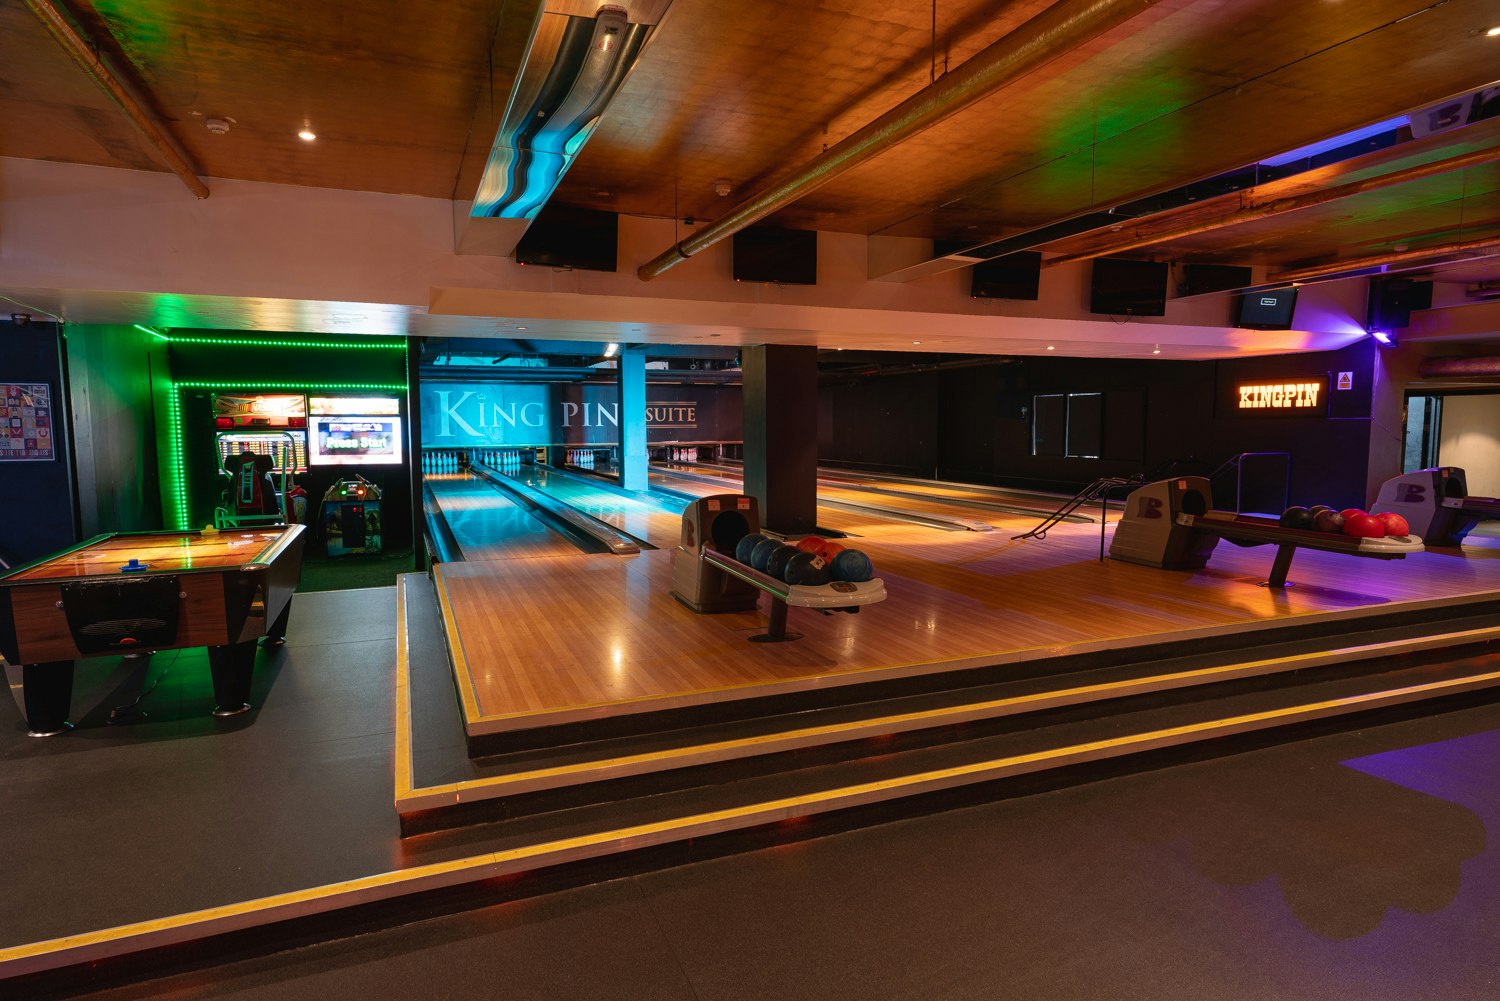 Bloomsbury Bowling Lanes & The Kingpin Suite - The KingPin Suite image 9